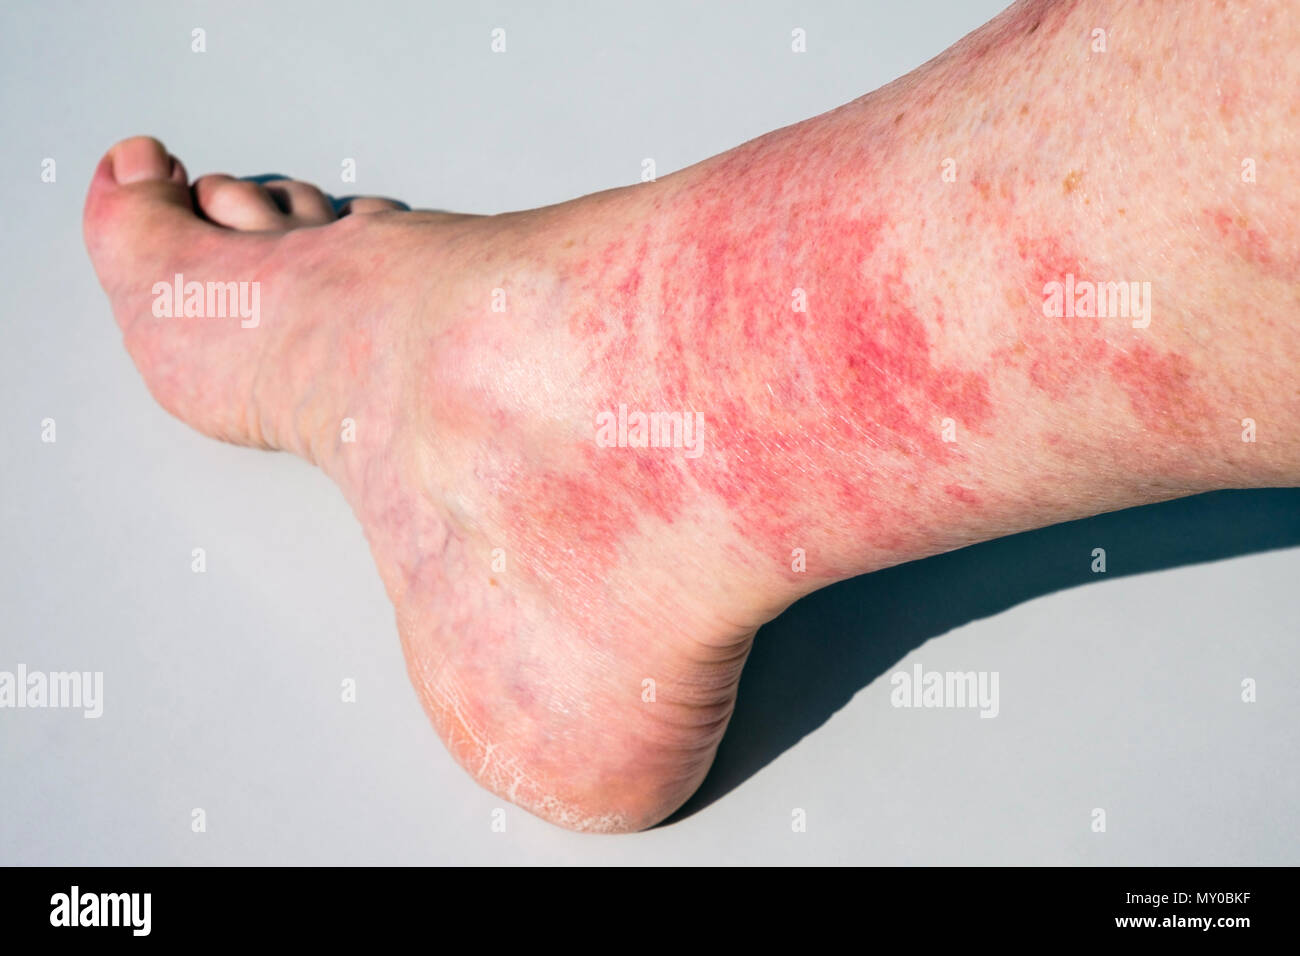 A mature woman's ankle and lower leg with prickly heat rash or golfer’s vasculitis causing red skin due to getting too hot when walking or exercising Stock Photo